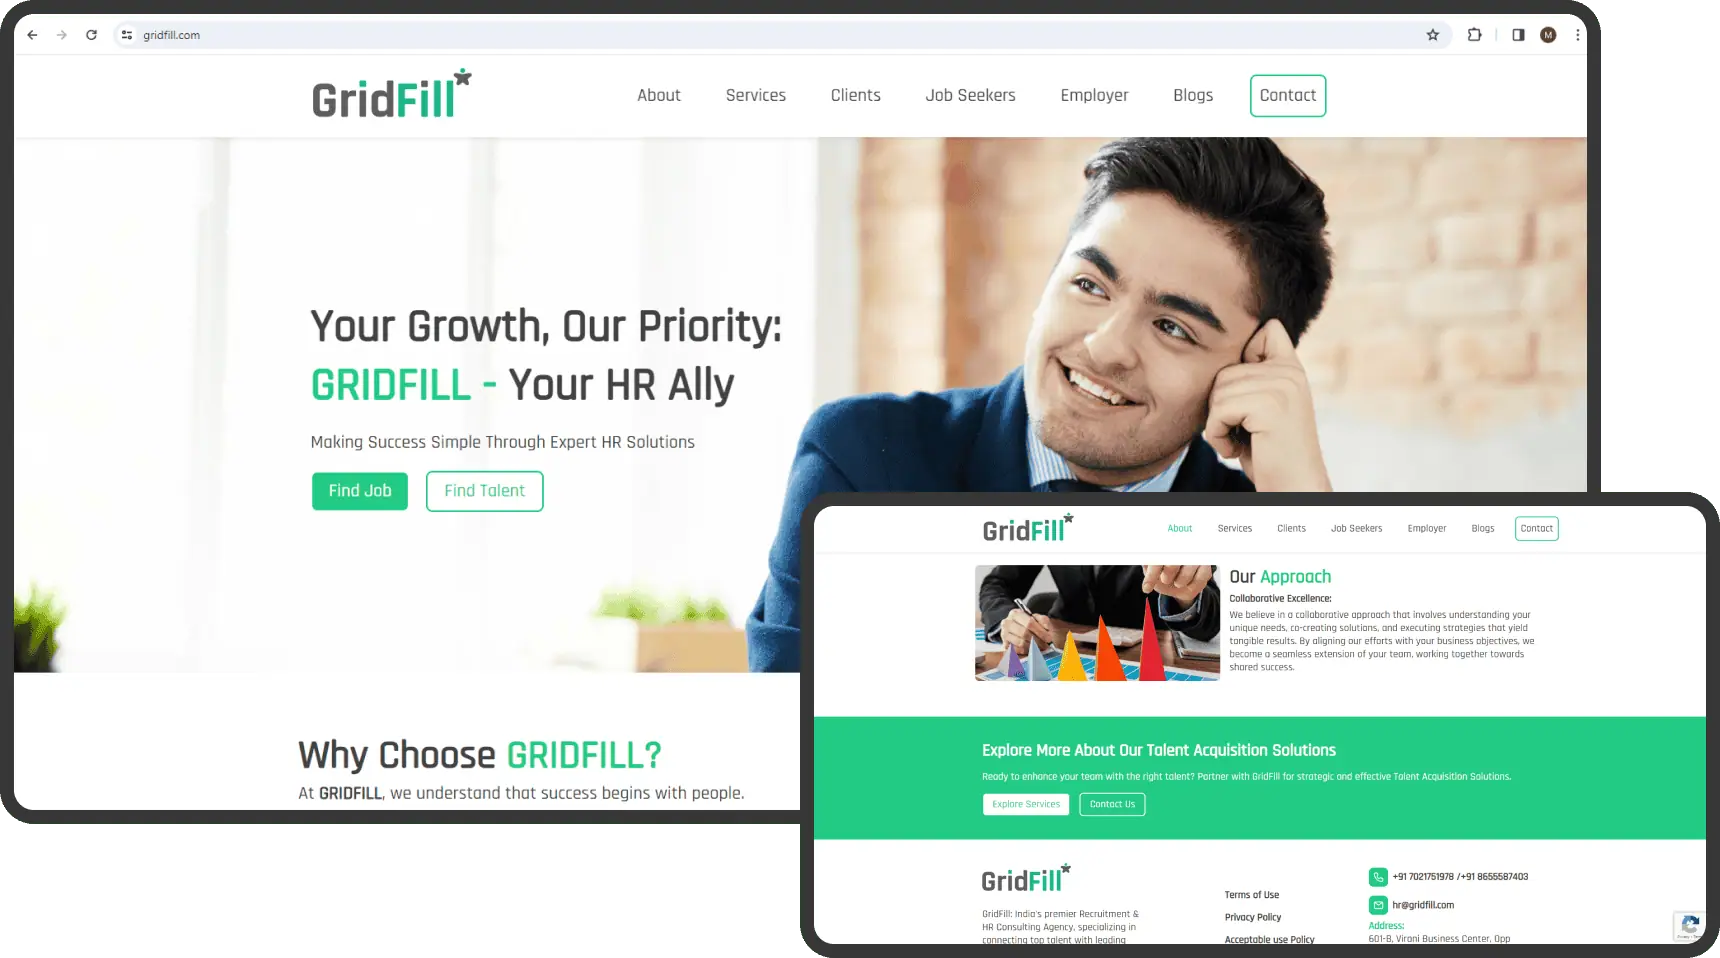 gridfill website introduction